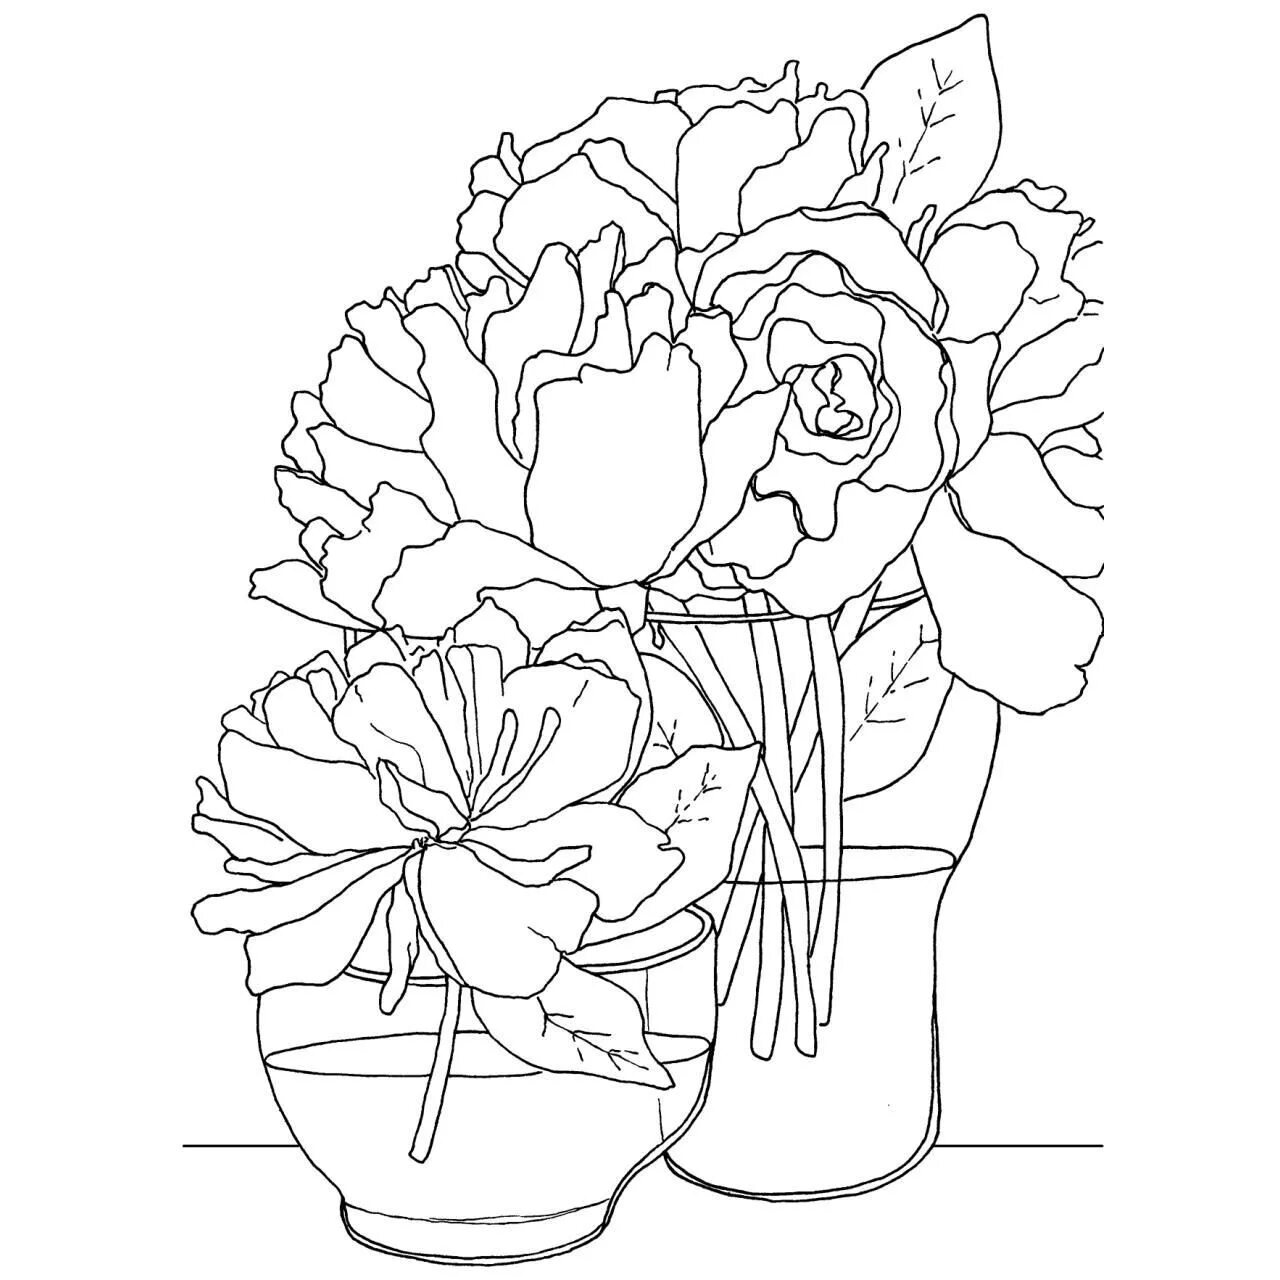 A beautiful bouquet of flowers in a vase coloring book